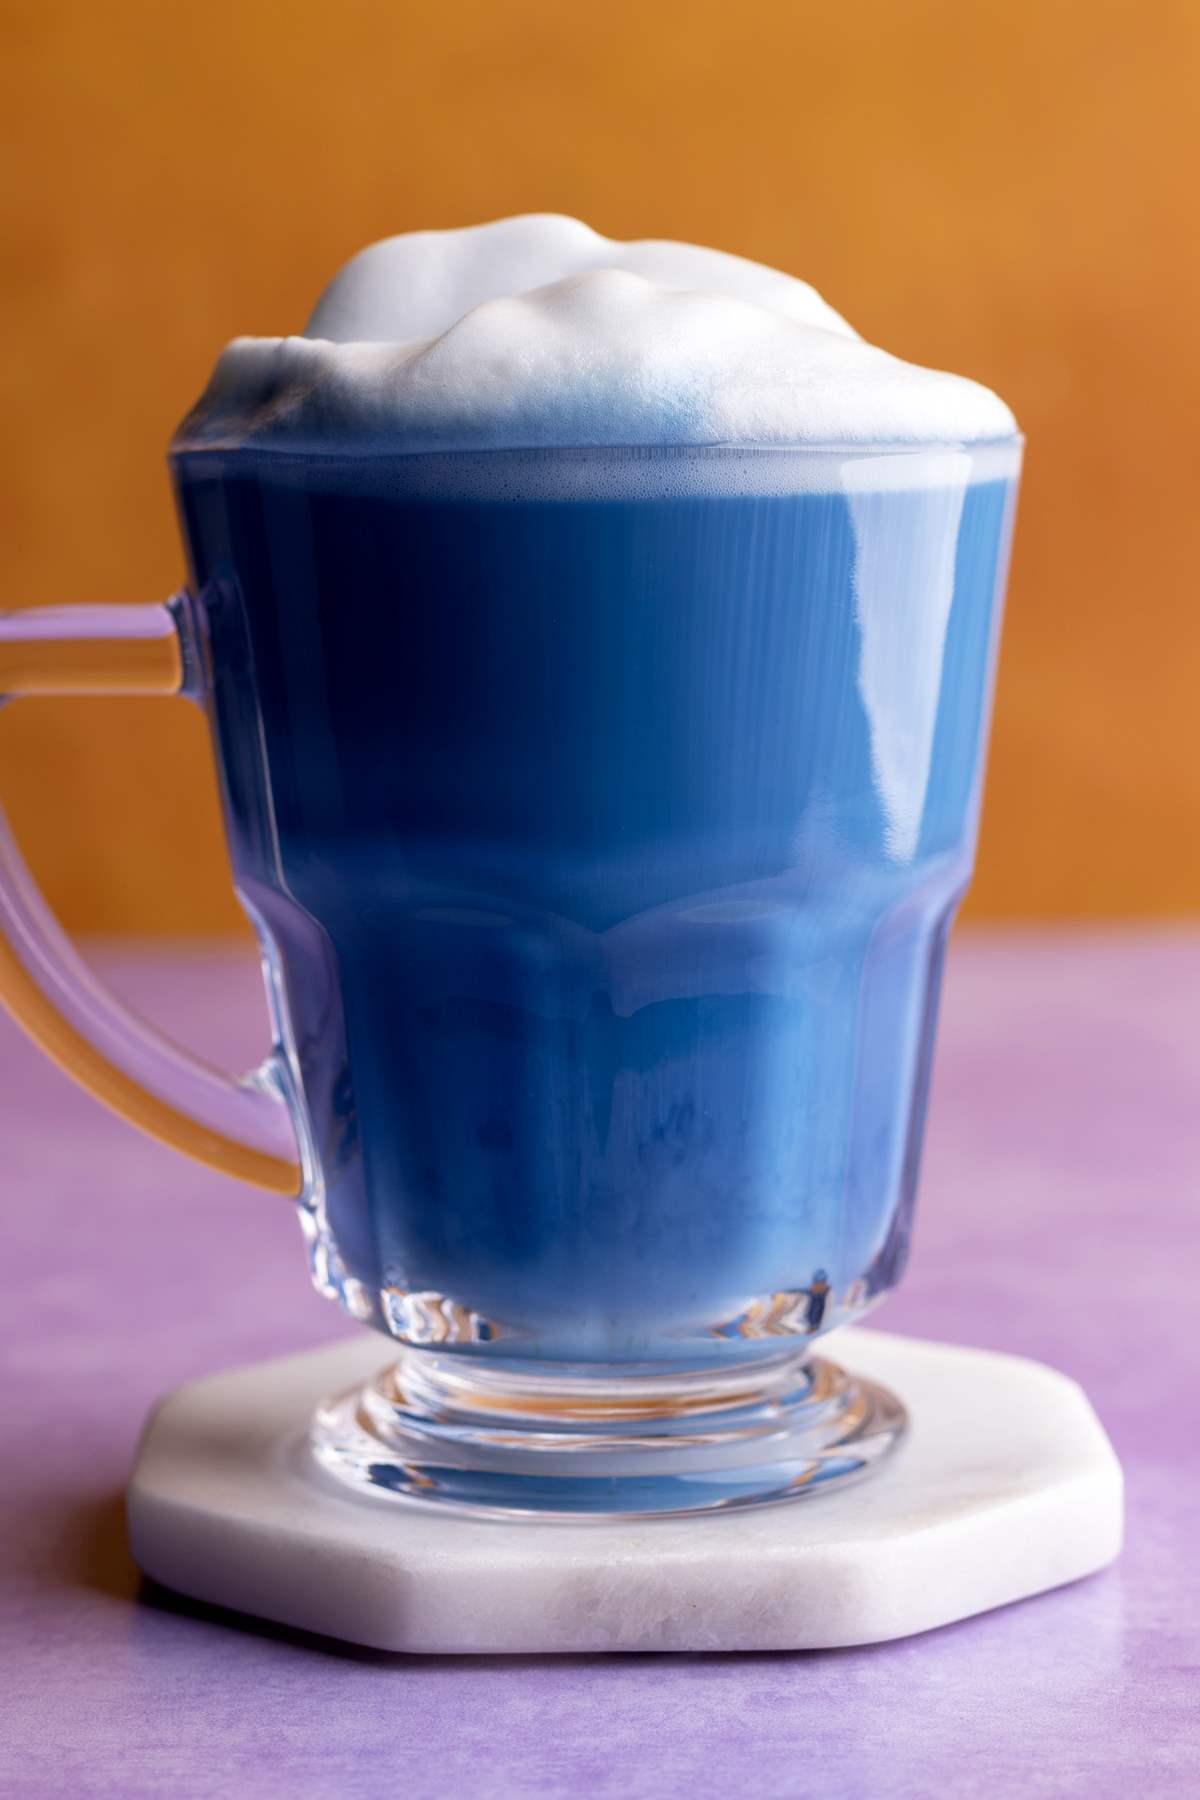 Butterfly pea latte in glass mug on a coaster.